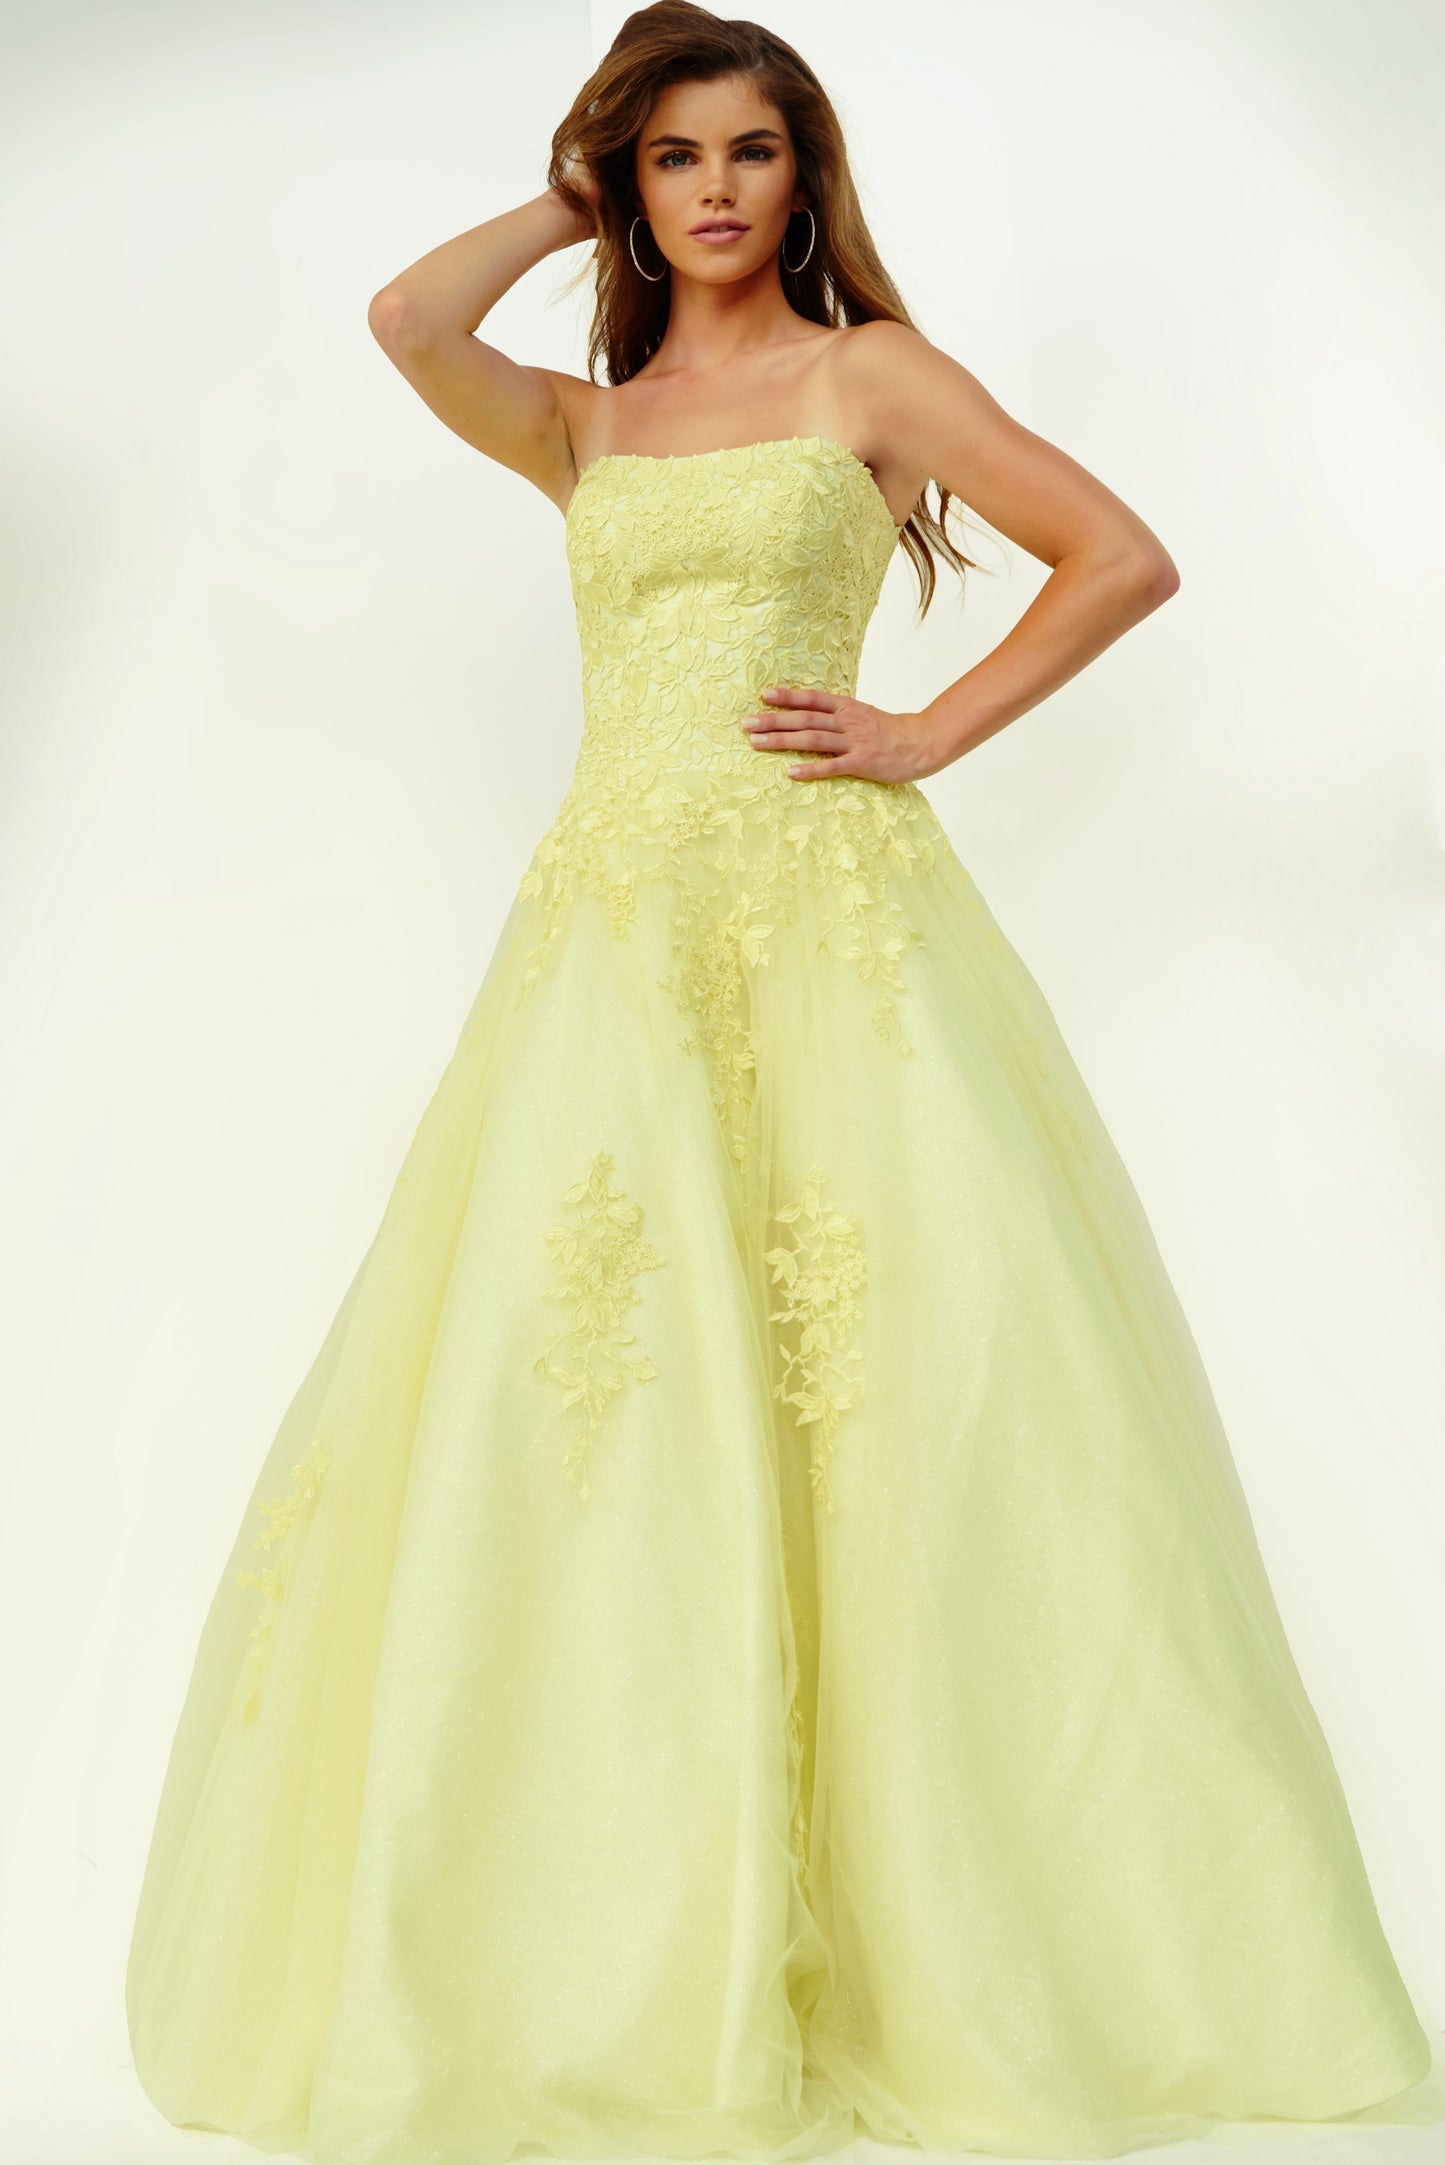 Jovani JVN1831 is a Long Tulle Ball Gown Prom Dress with a fitted strapless bodice with floral embroidering. Embroidering cascades down into the skirt of this ballgown evening gown. Also makes a perfect informal wedding dress. JVN by Jovani 1831 